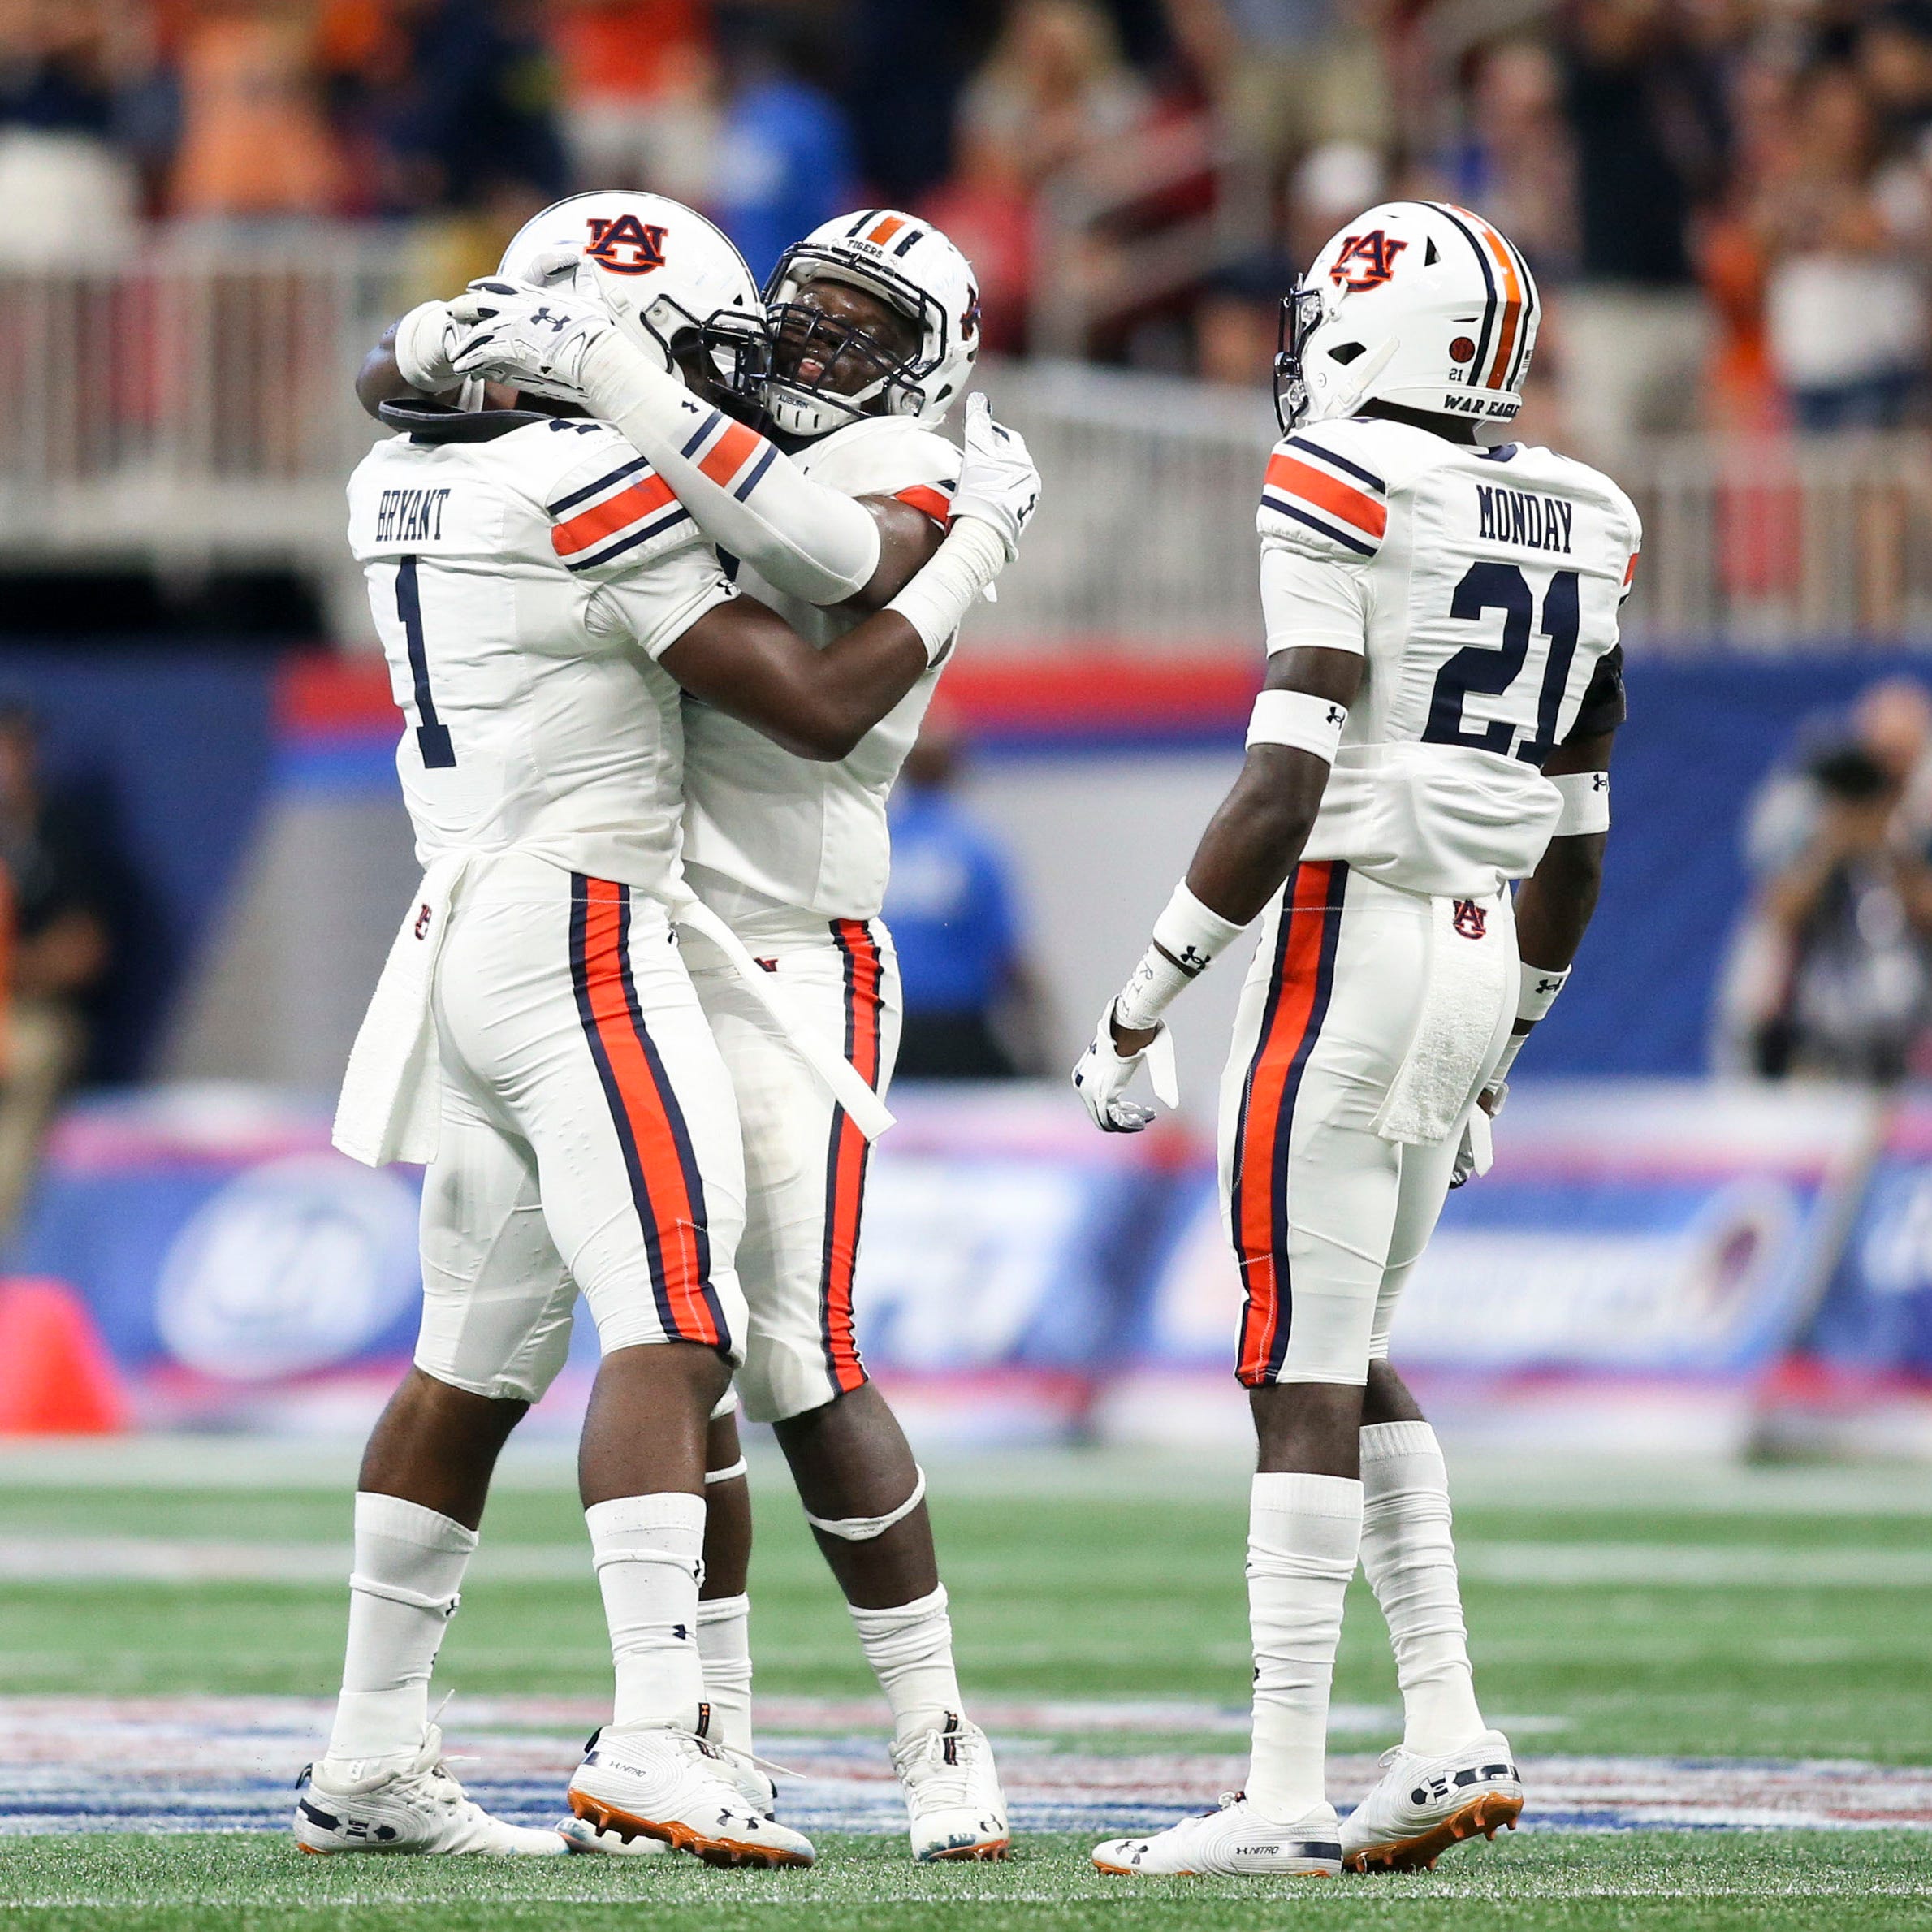 Auburn players celebrate after a sack during the fourth quarter against Washington.